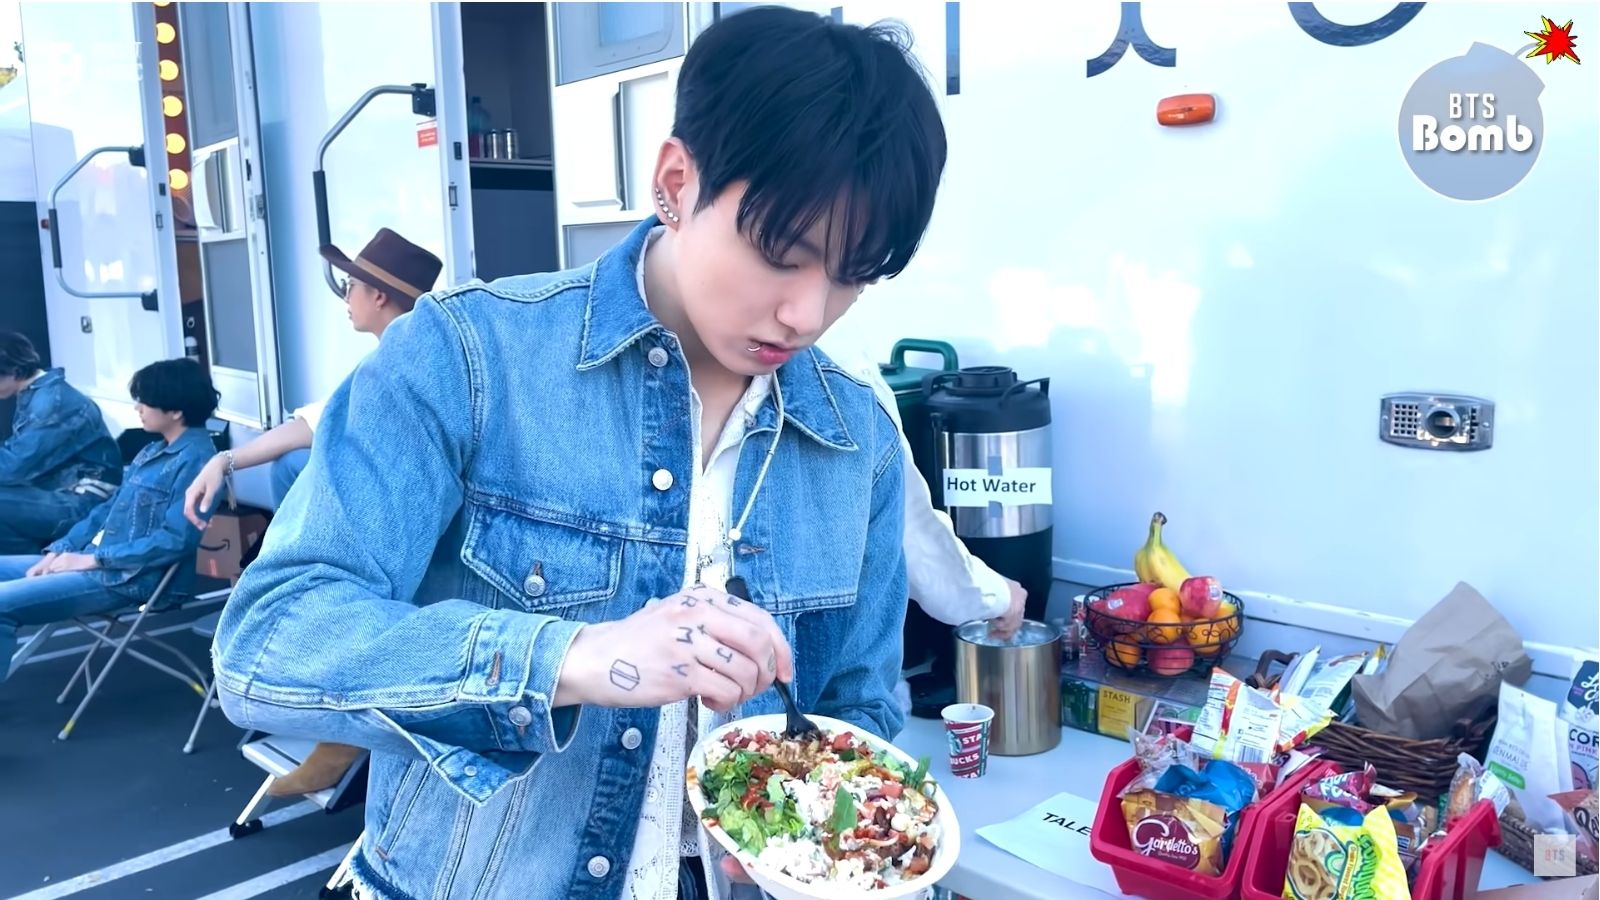 BTS Jungkook chipotle chicotle